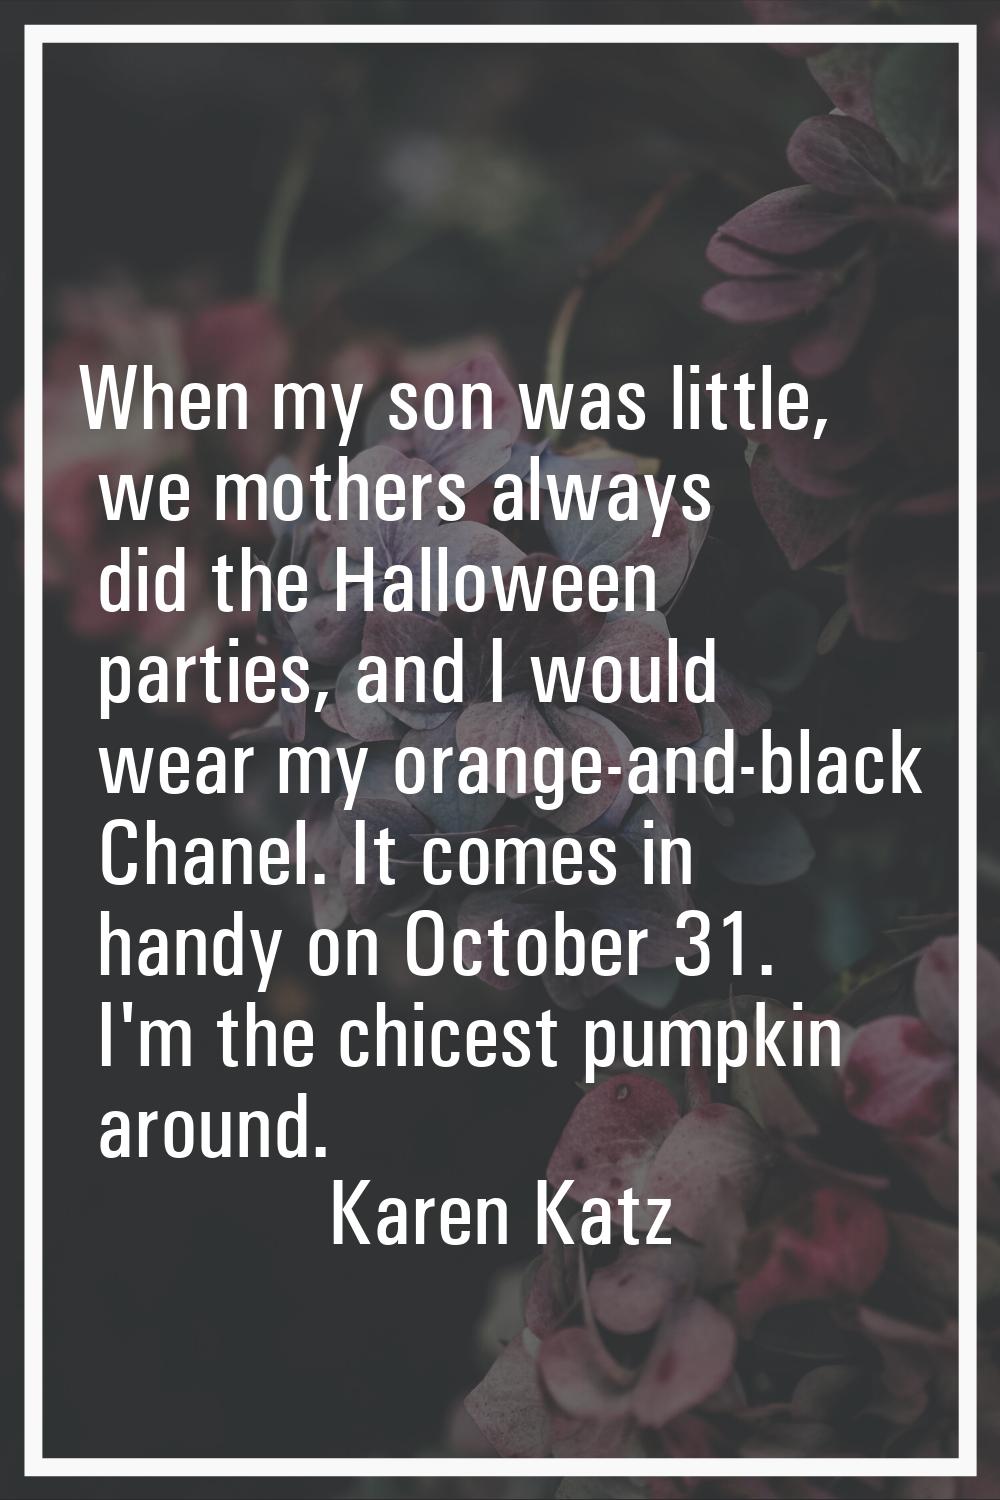 When my son was little, we mothers always did the Halloween parties, and I would wear my orange-and